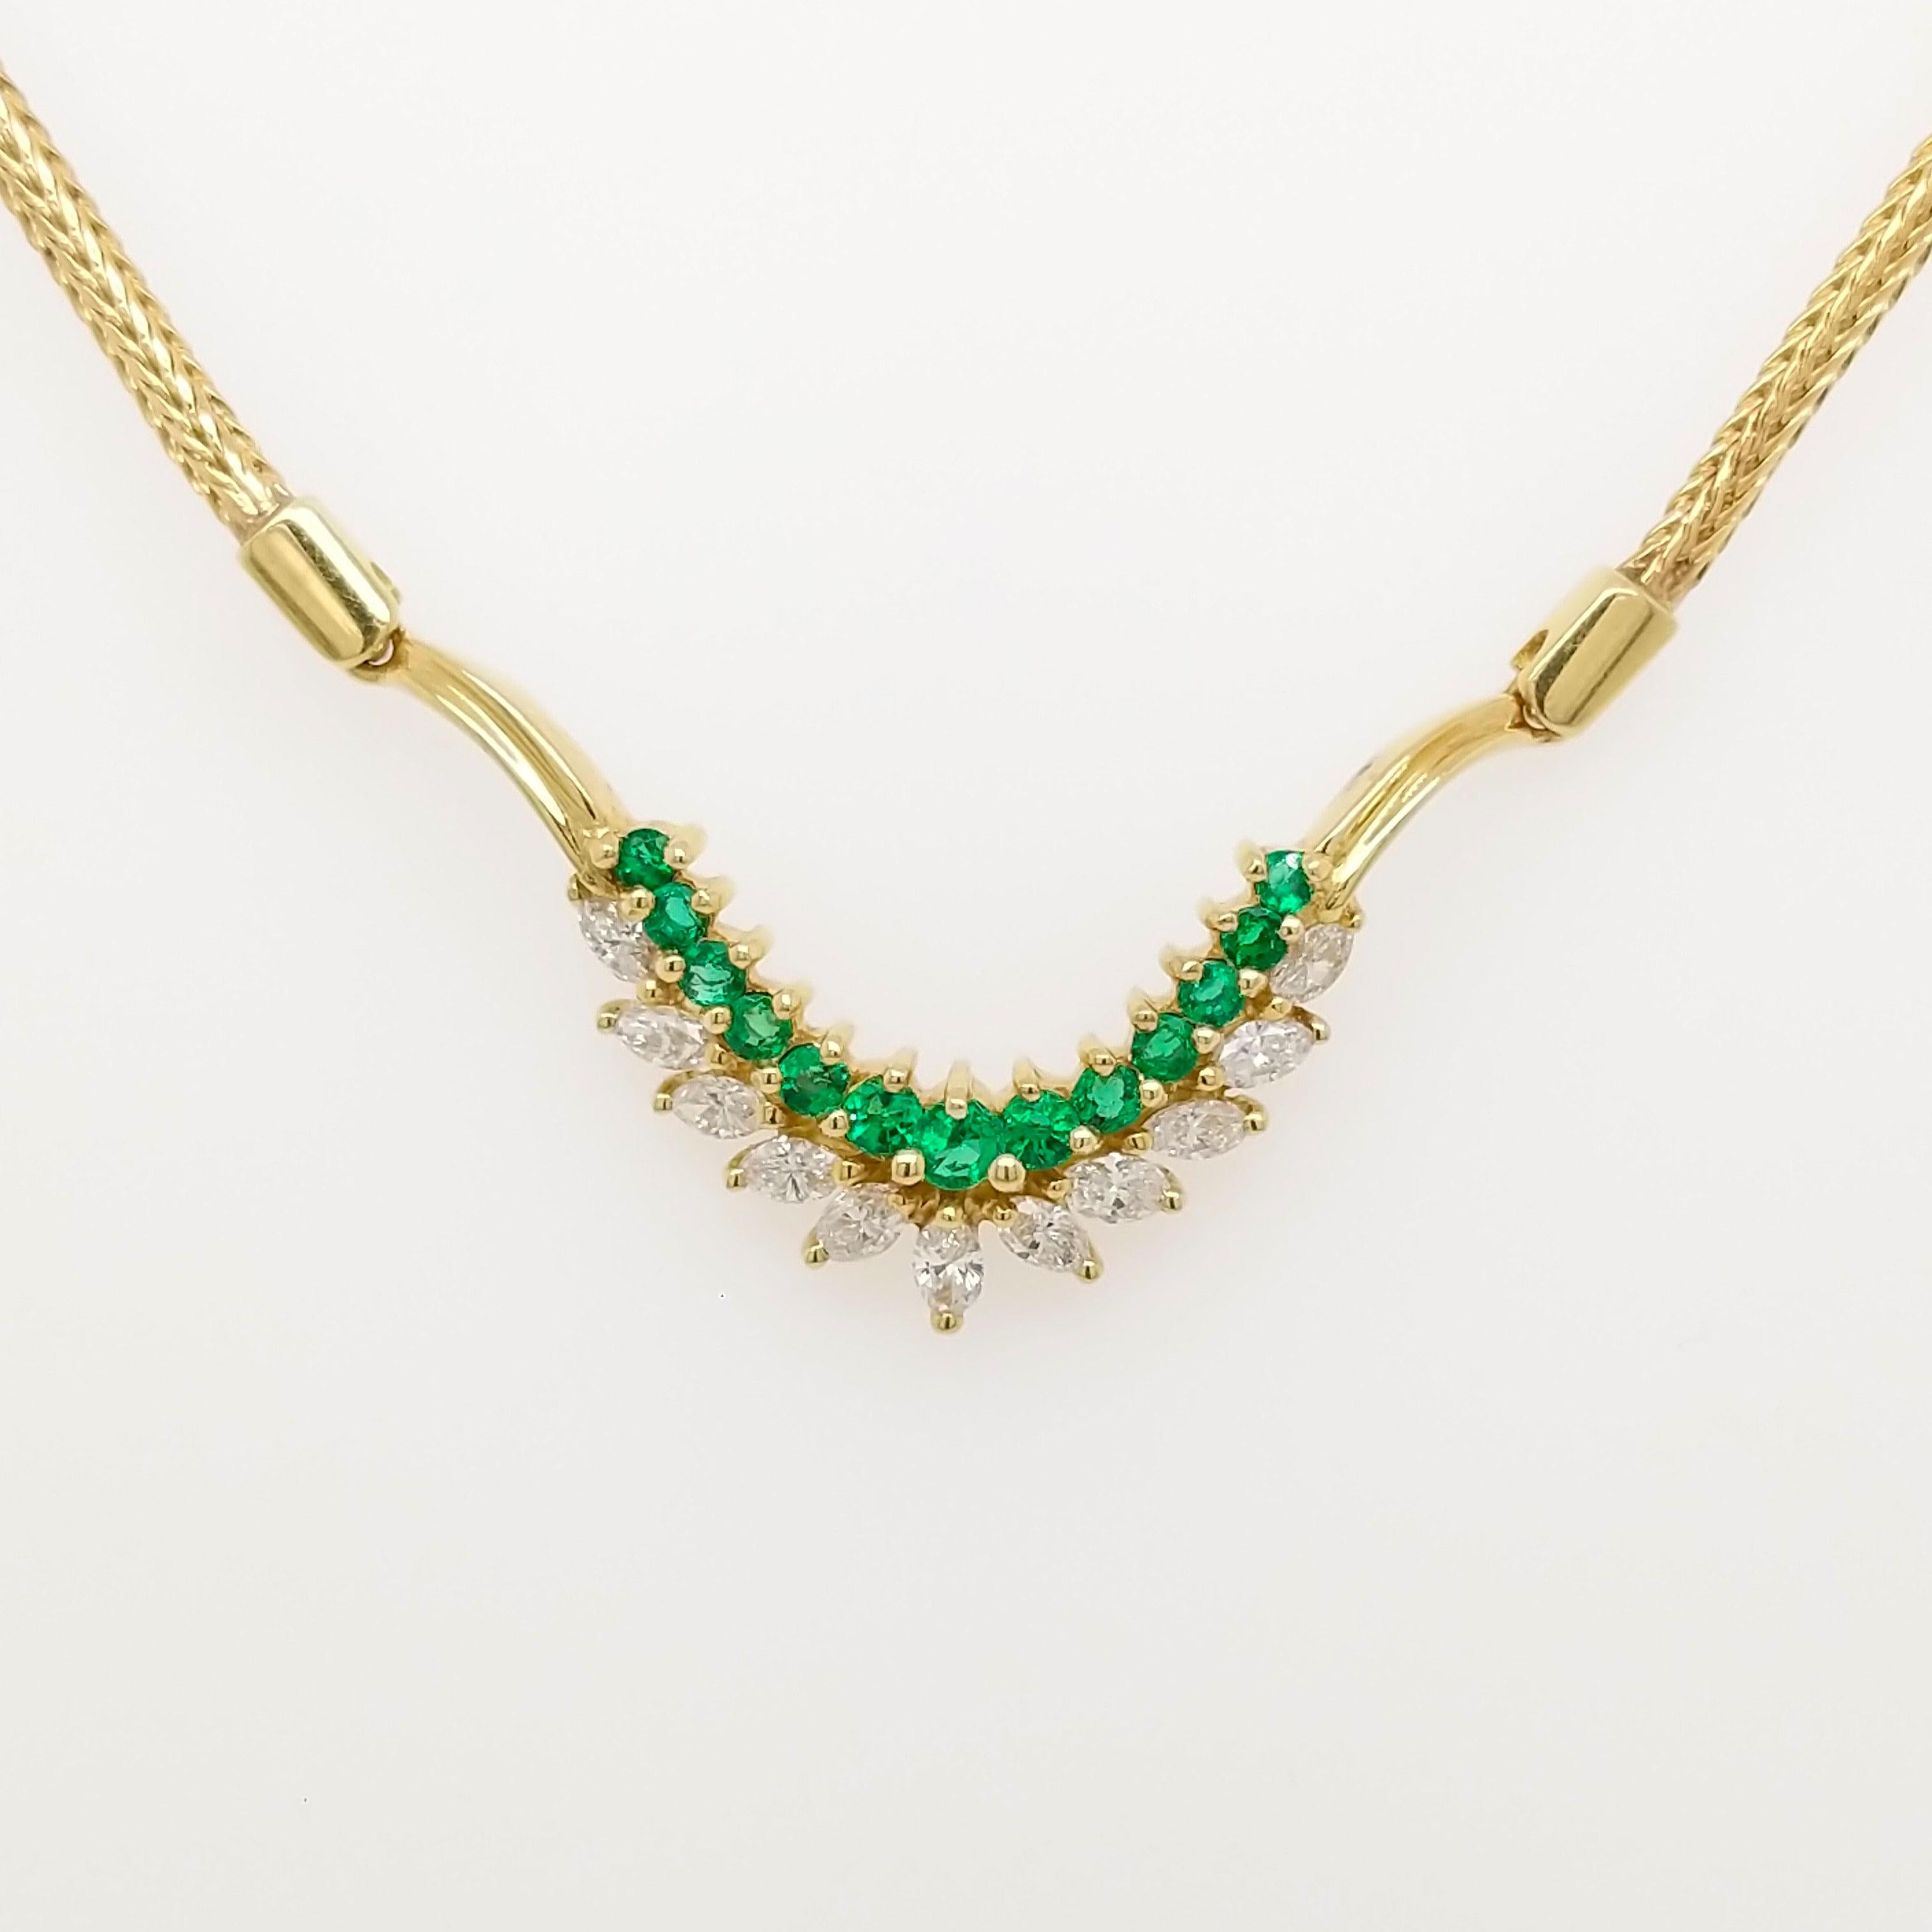 This timeless necklace was made by and is signed by Black, Starr & Frost, the oldest operating jewelry company in the United States! Dated to the 1960s and made of 18K yellow gold and amazing diamonds and emeralds, this necklace is guaranteed to